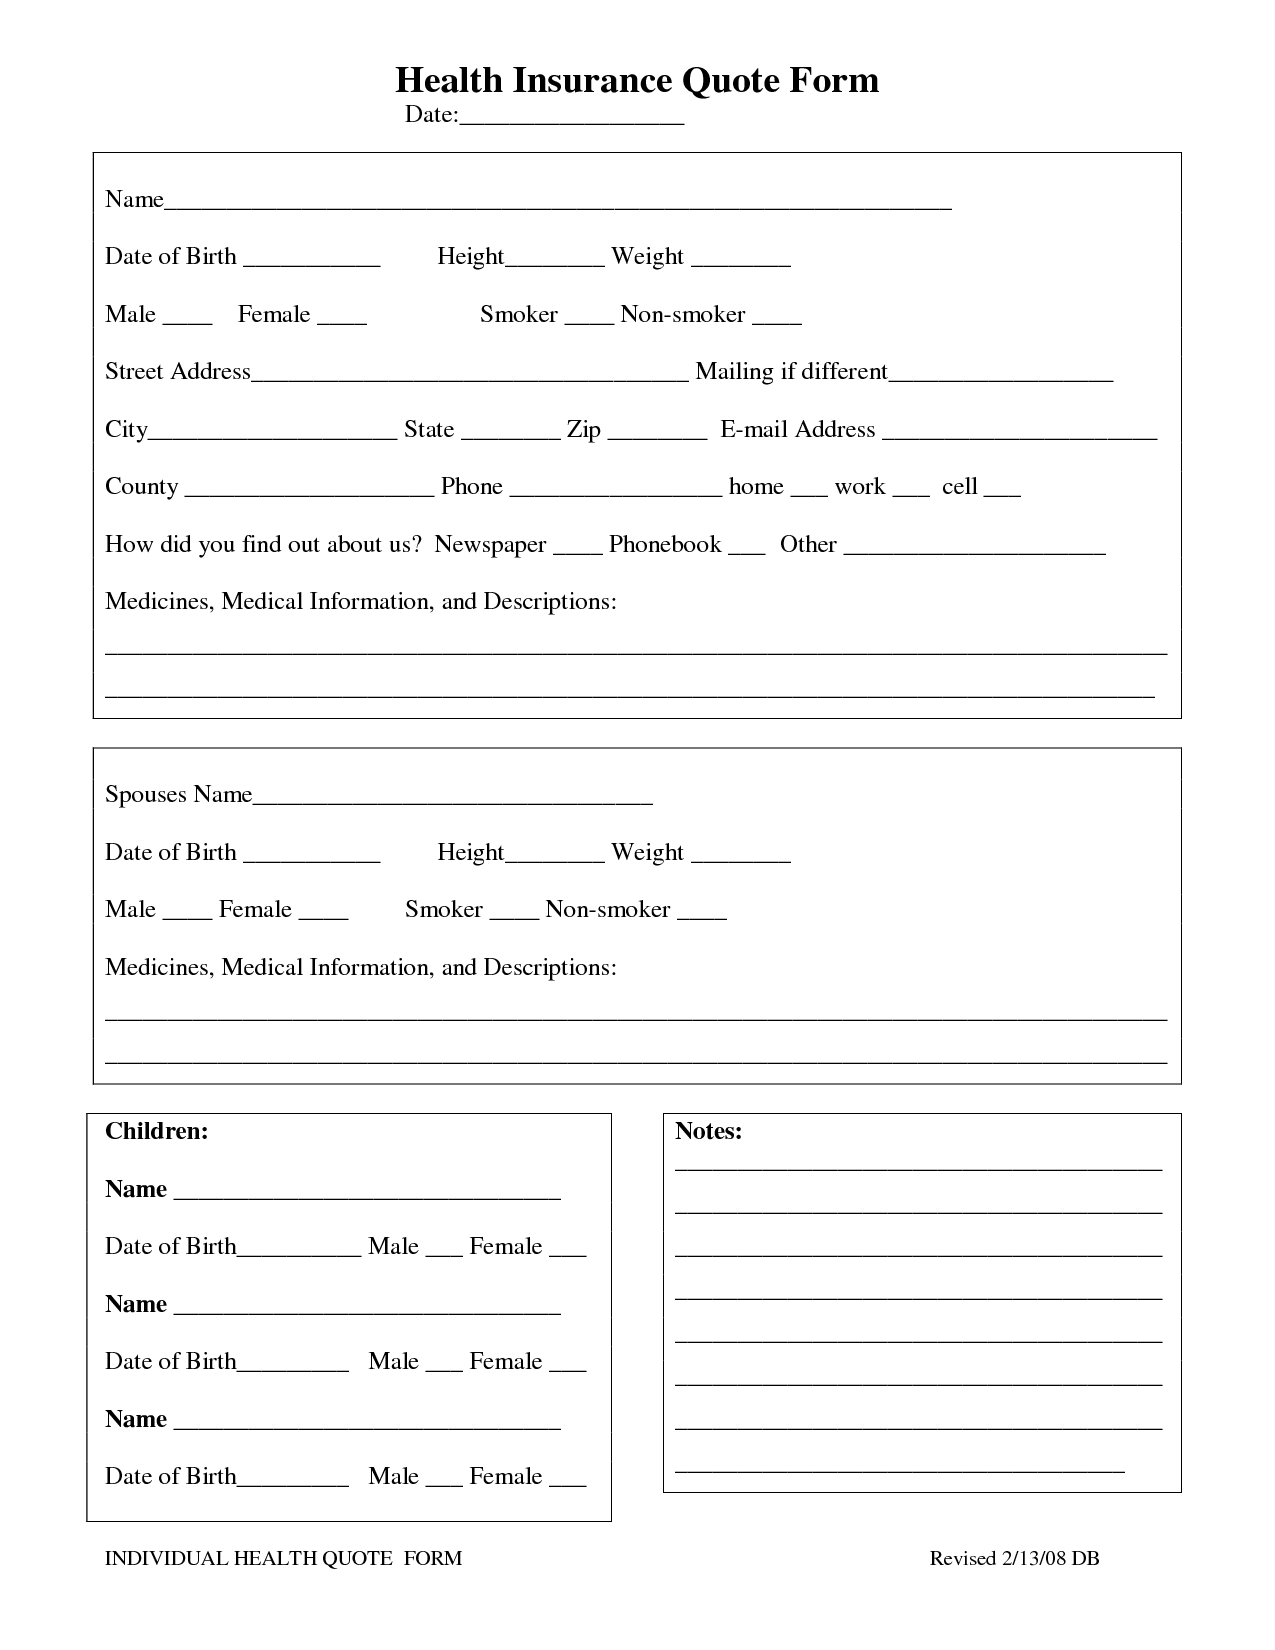 Life Insurance Quote Form 07